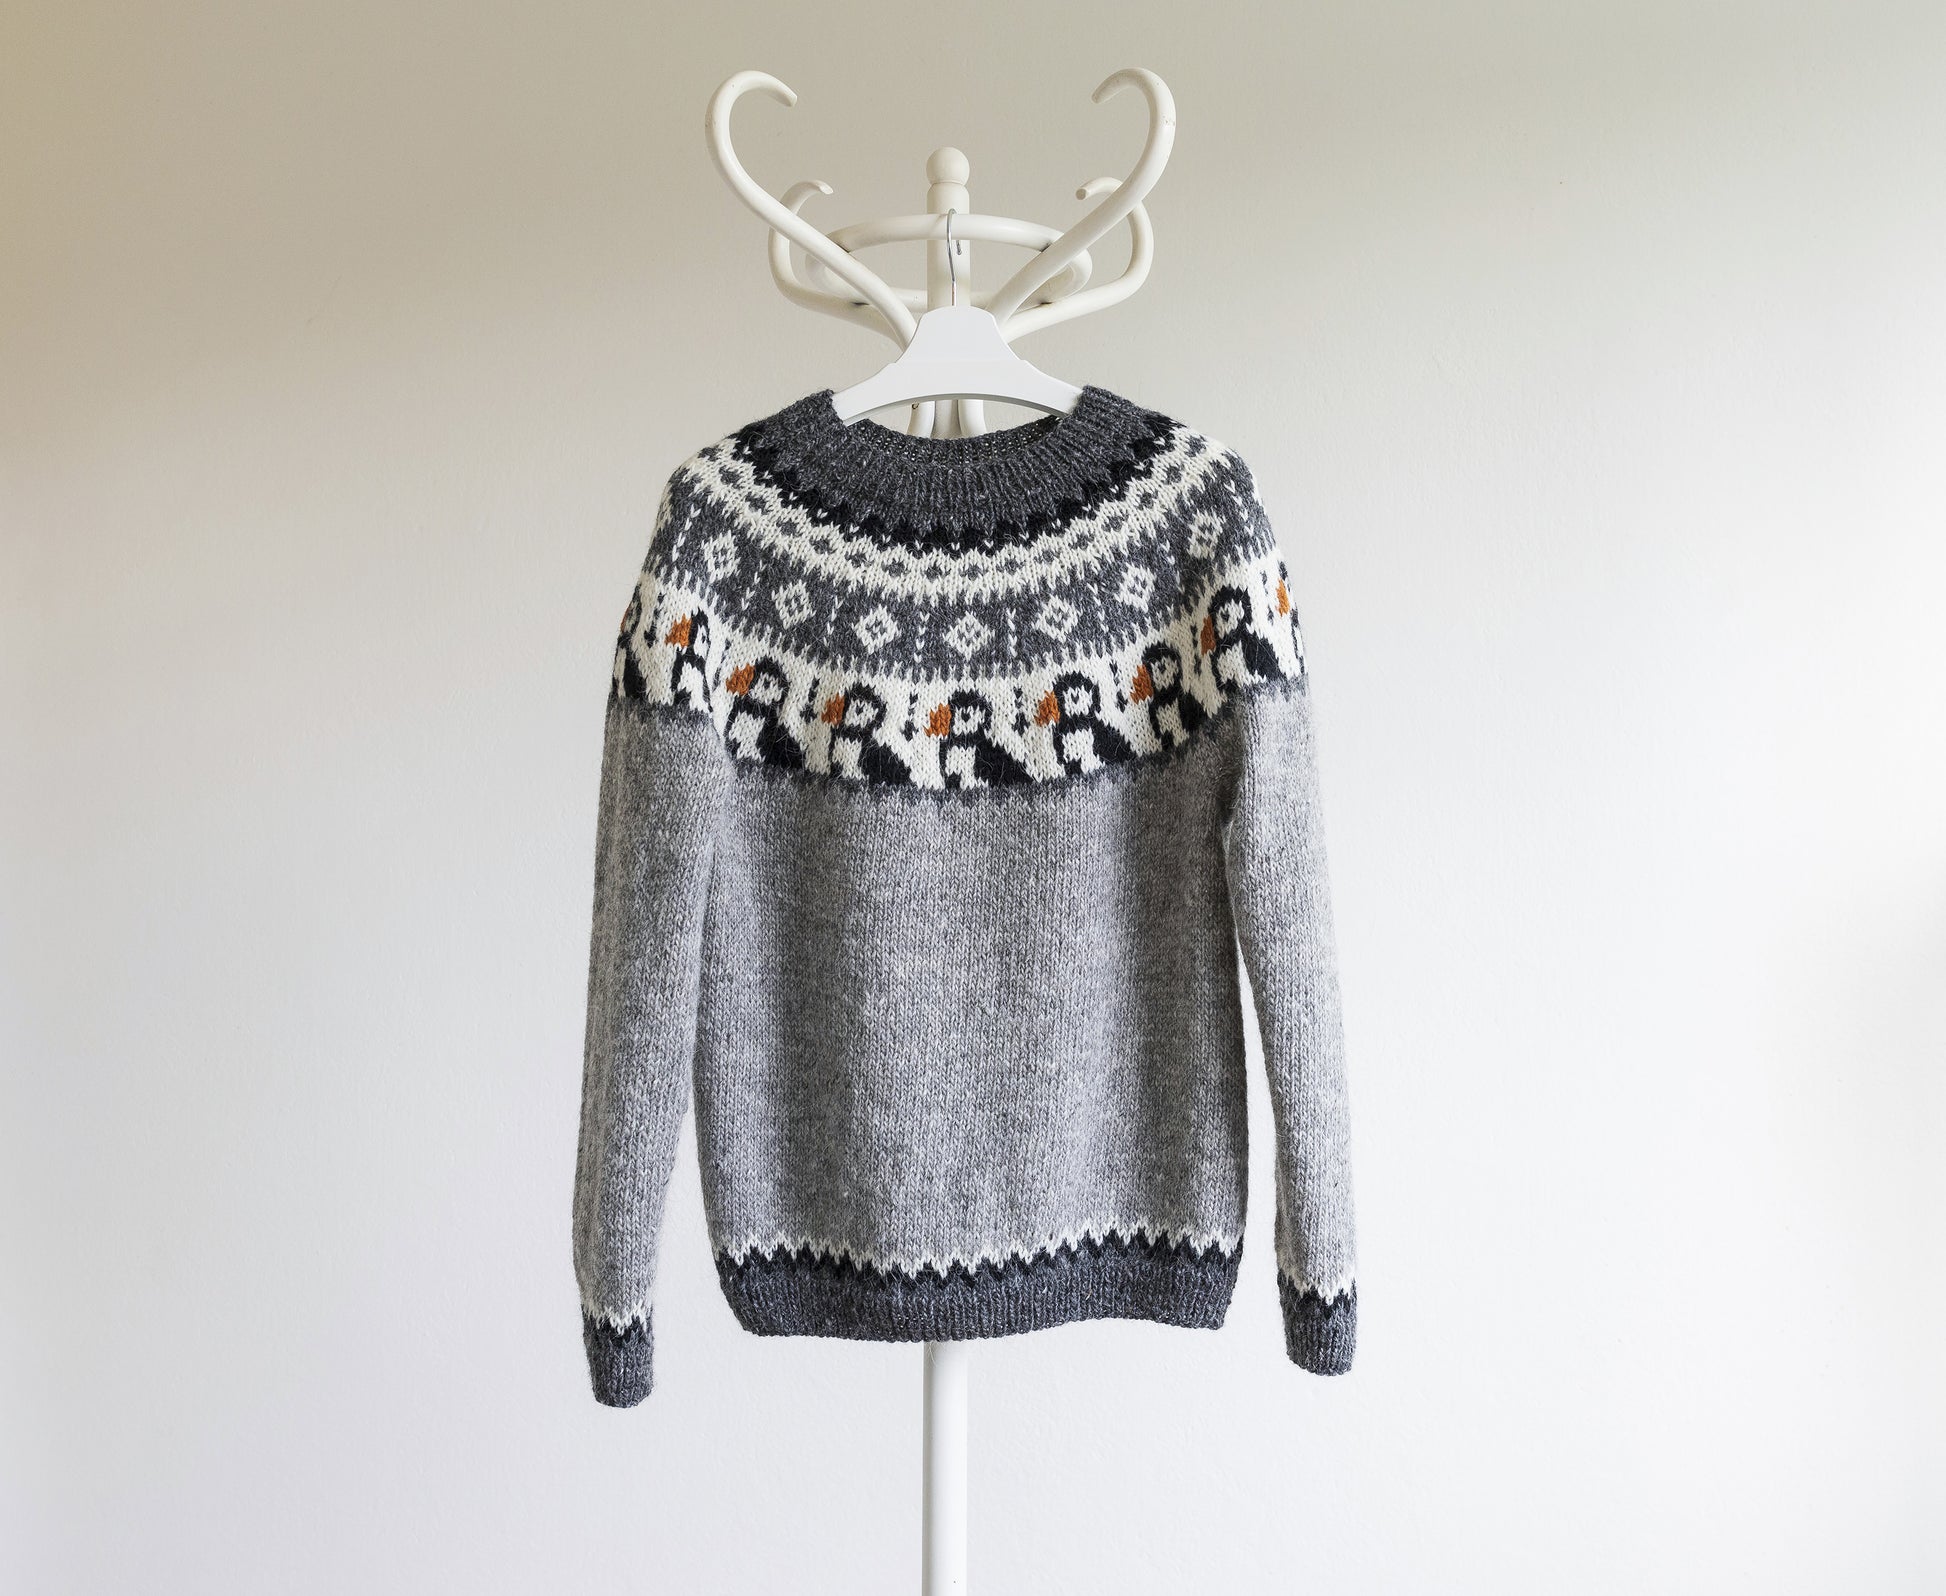 Grey and white knitted Icelandic lopapeysa sweater in Puffins knitting pattern